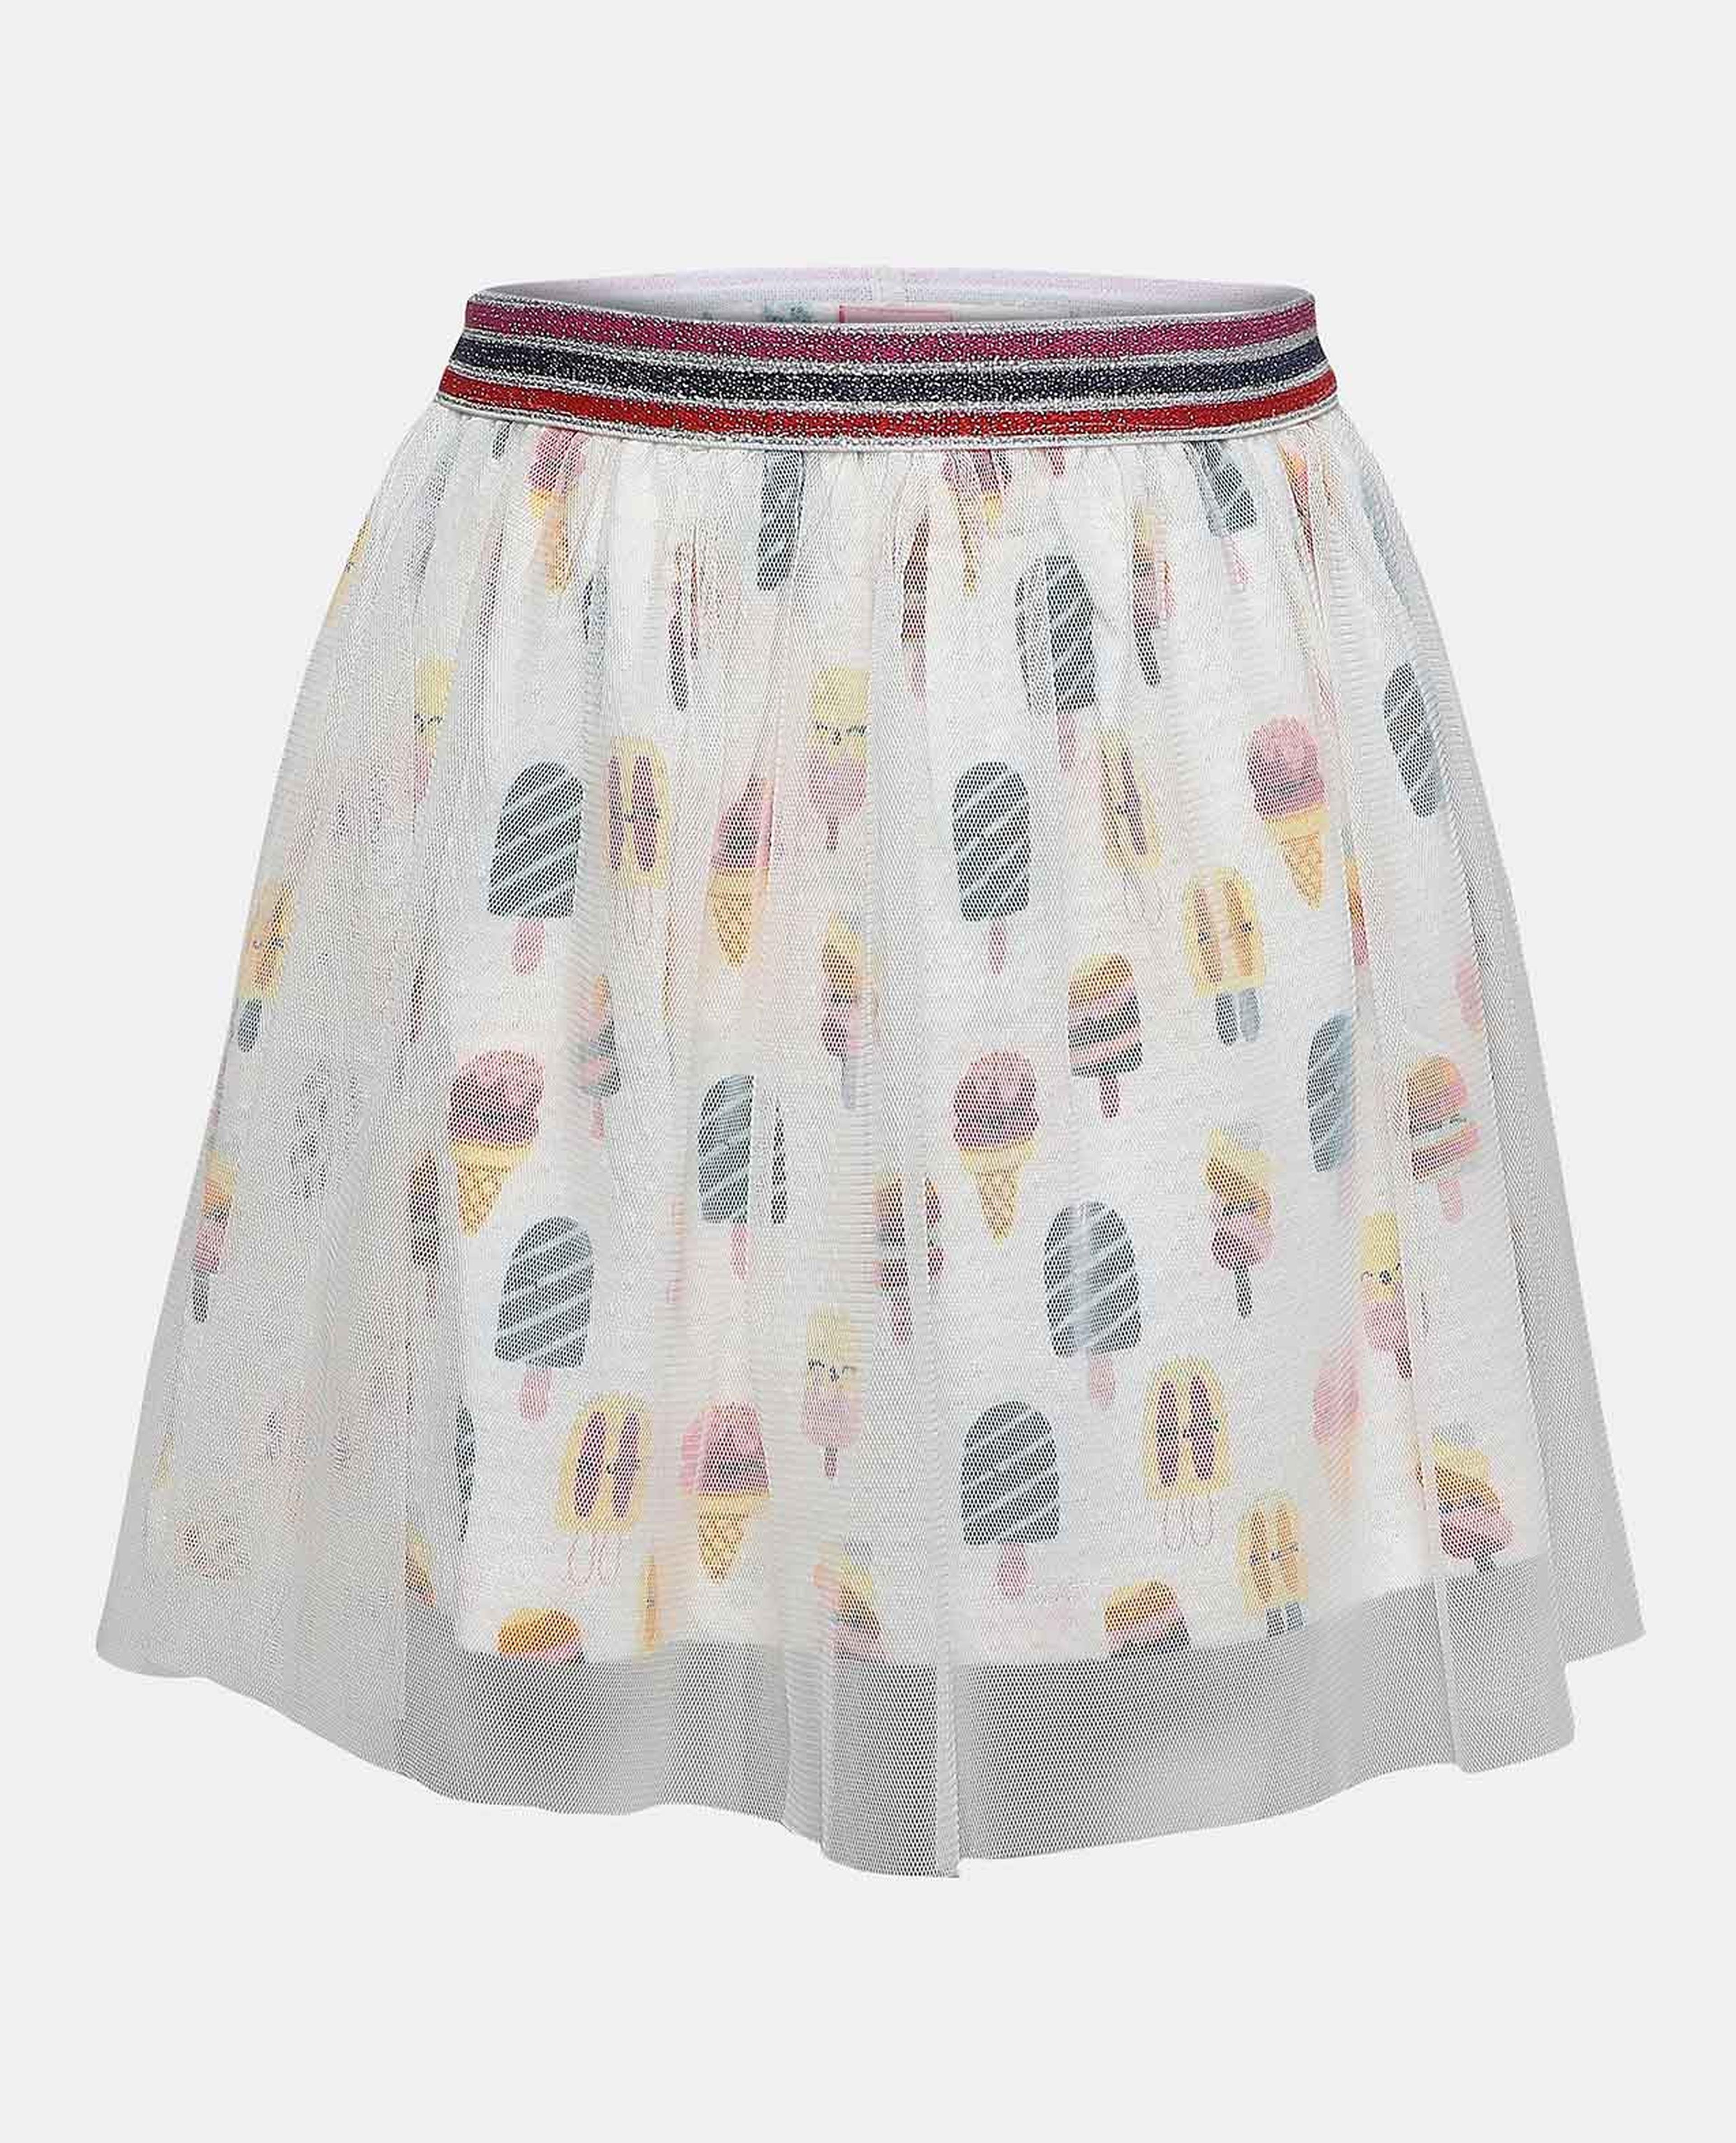 Printed Knit Skirt with Elasticated Waistband